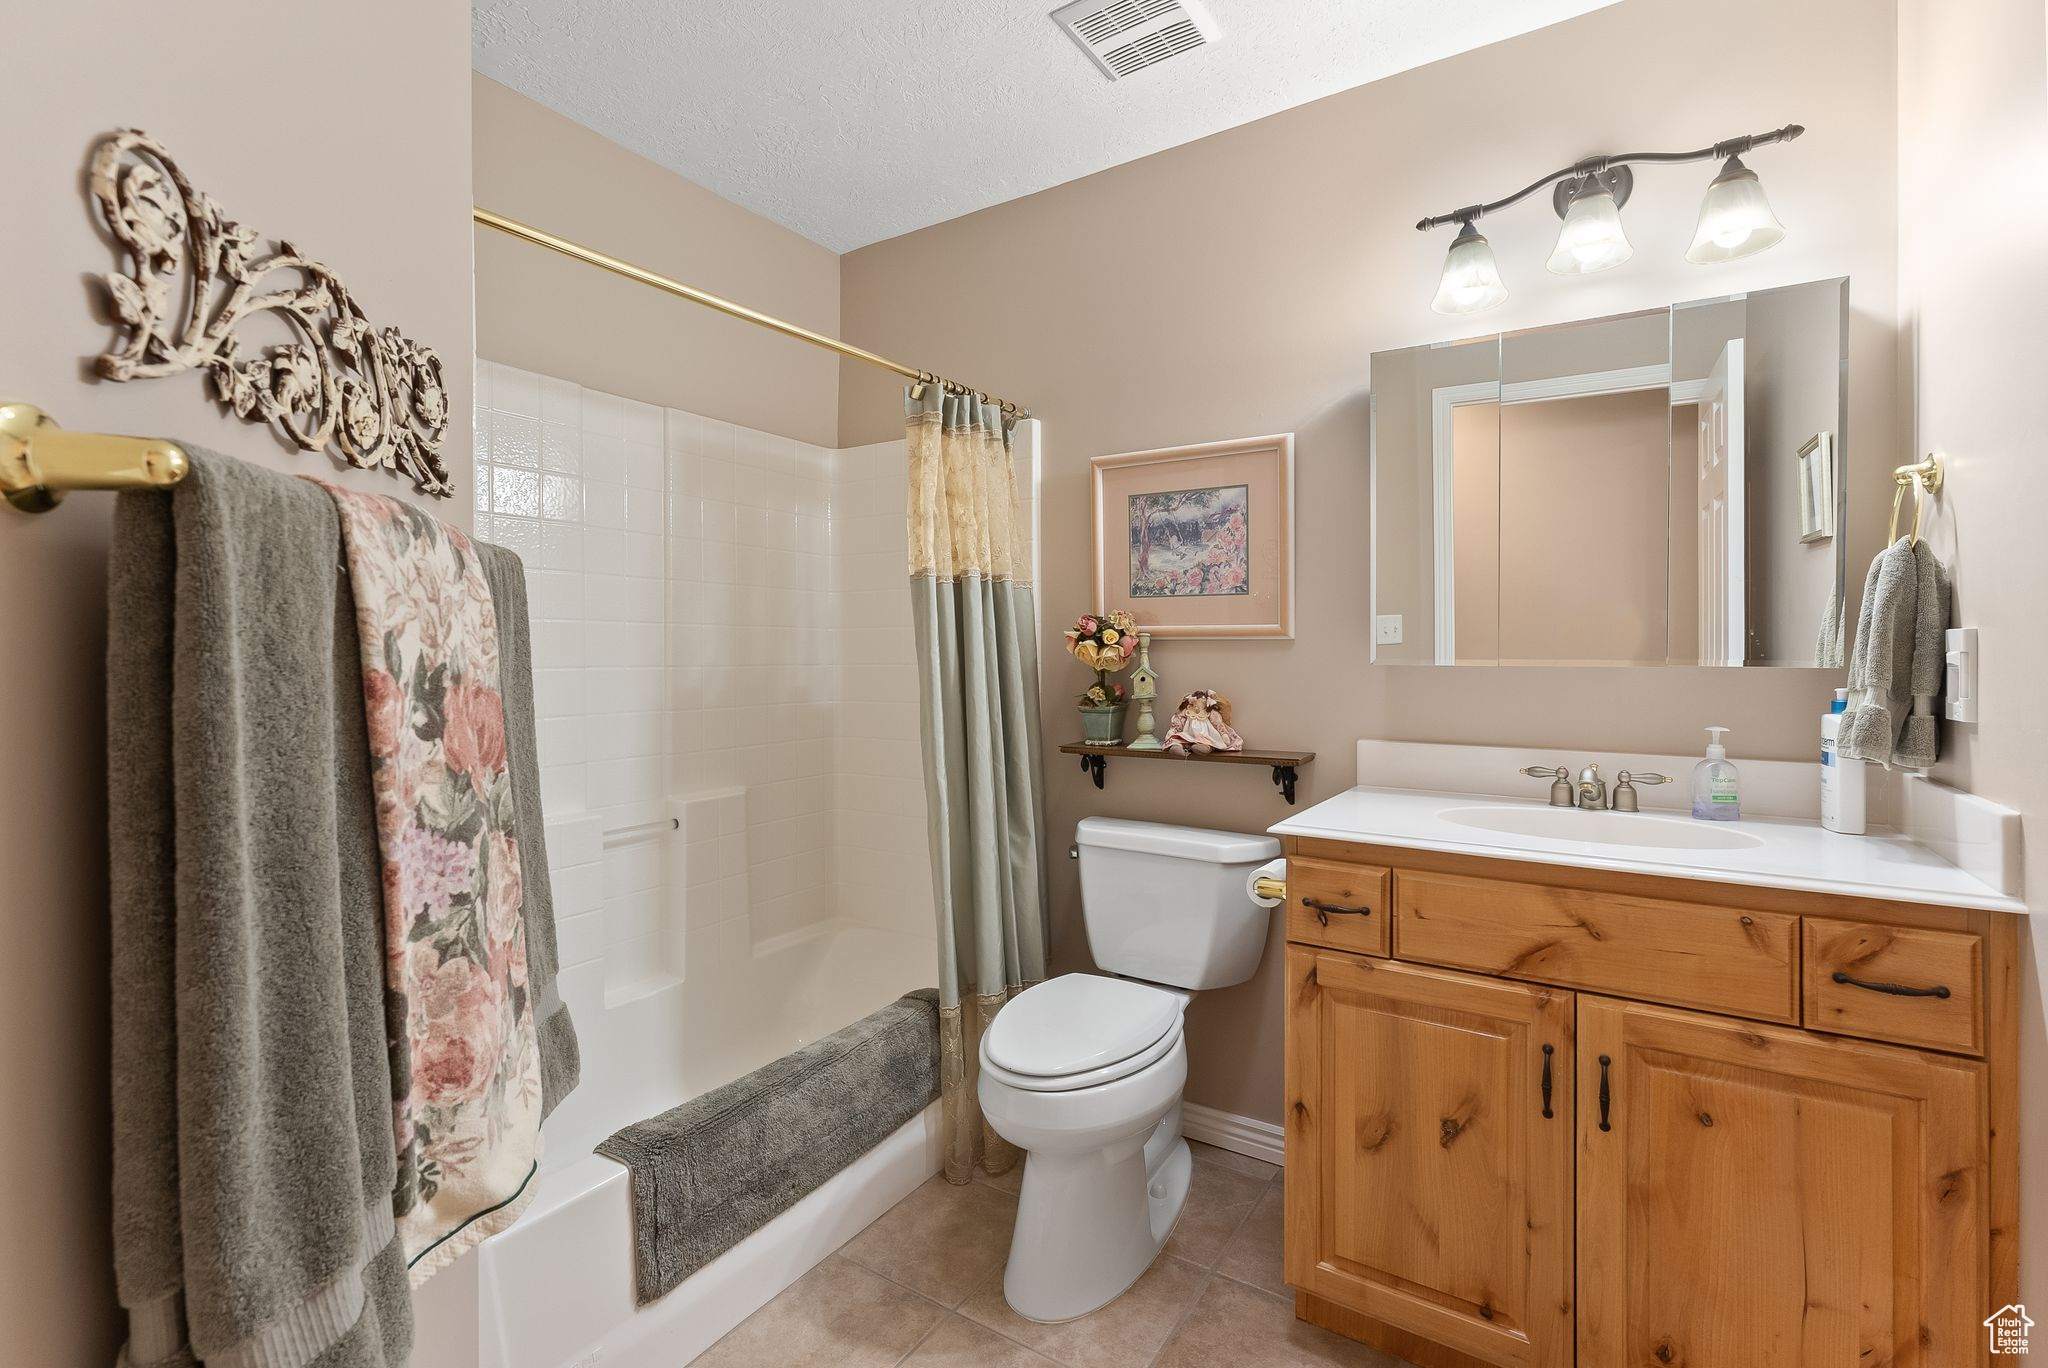 Full bathroom featuring toilet, tile flooring, a textured ceiling, vanity, and shower / bathtub combination with curtain